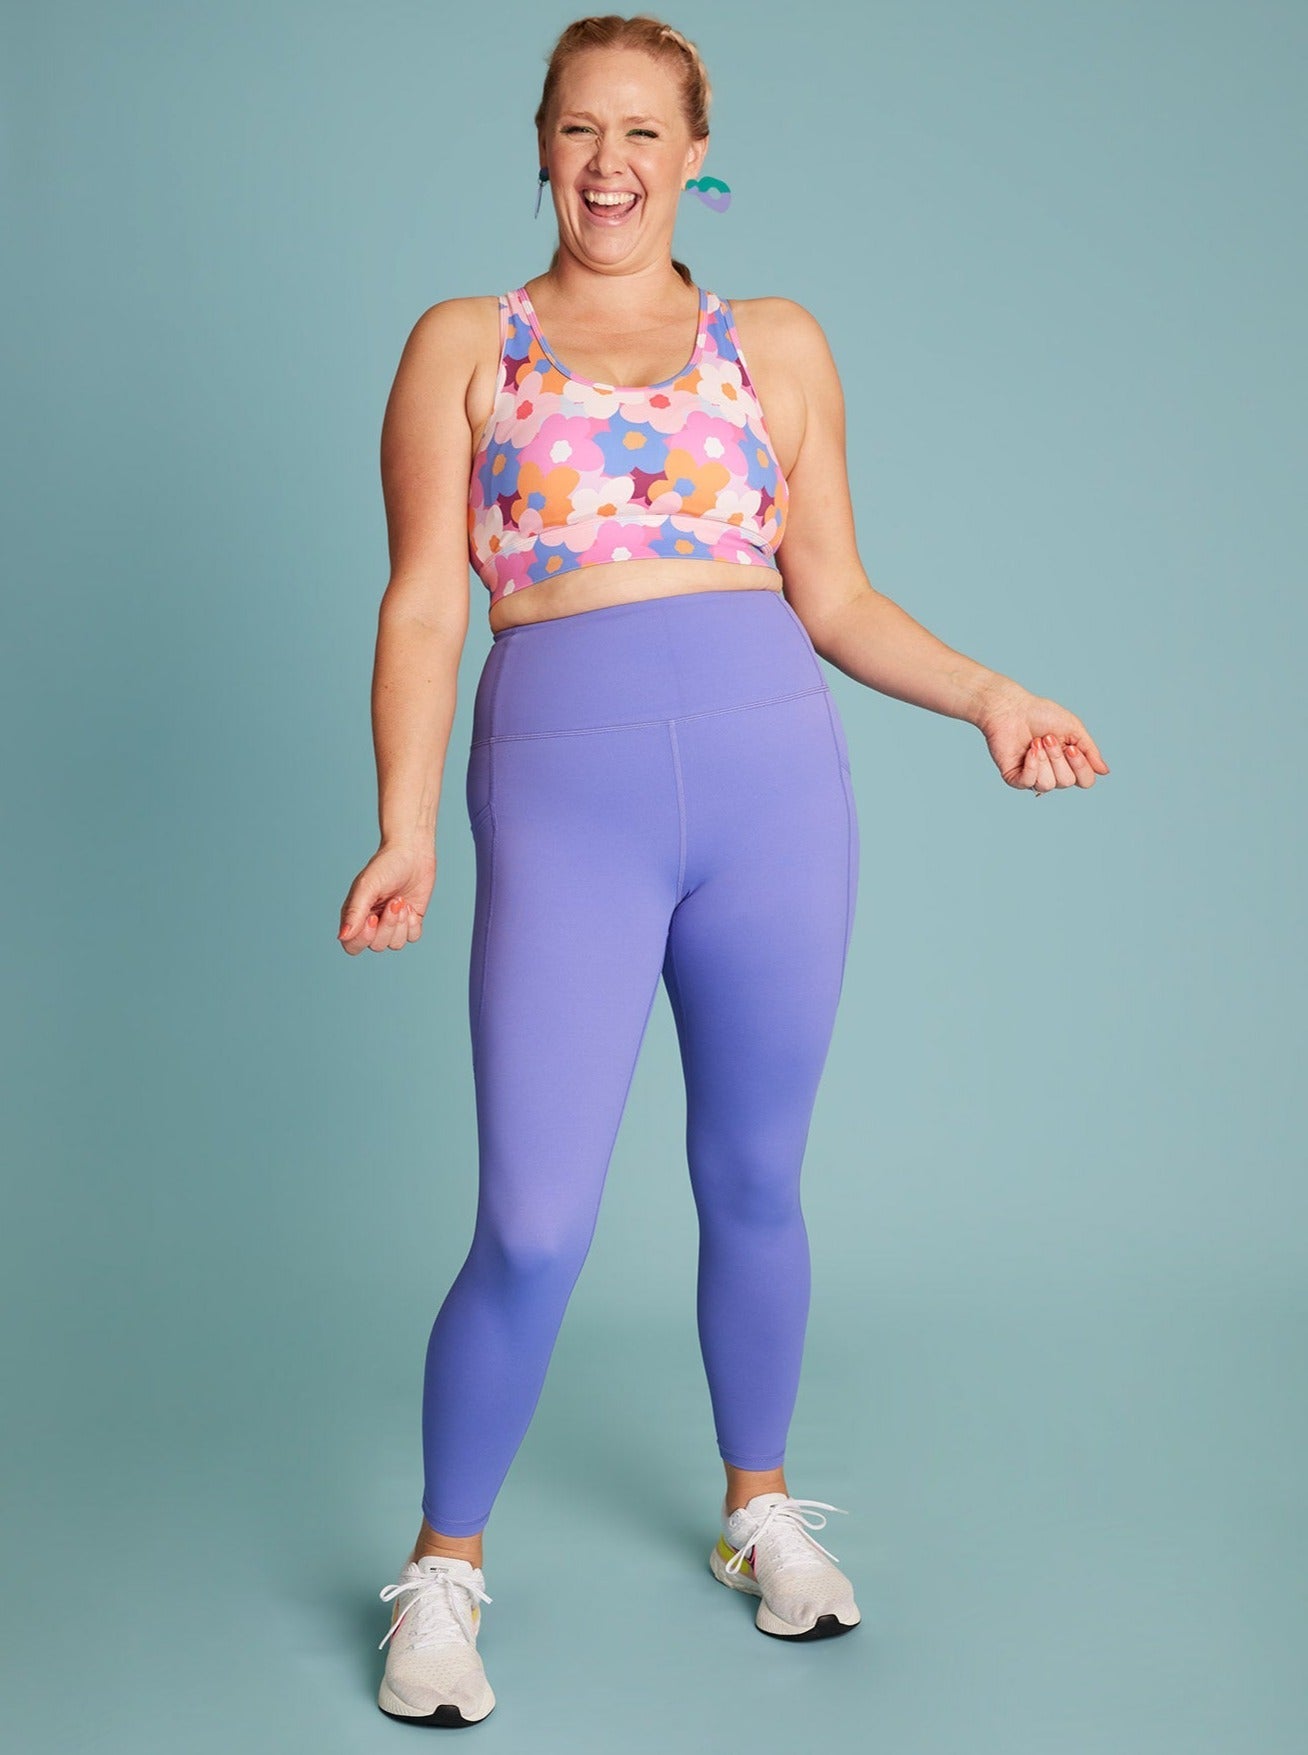 Periwinkle Purple Everyday Legging - 7/8 length - squat proof no sweat marks tights